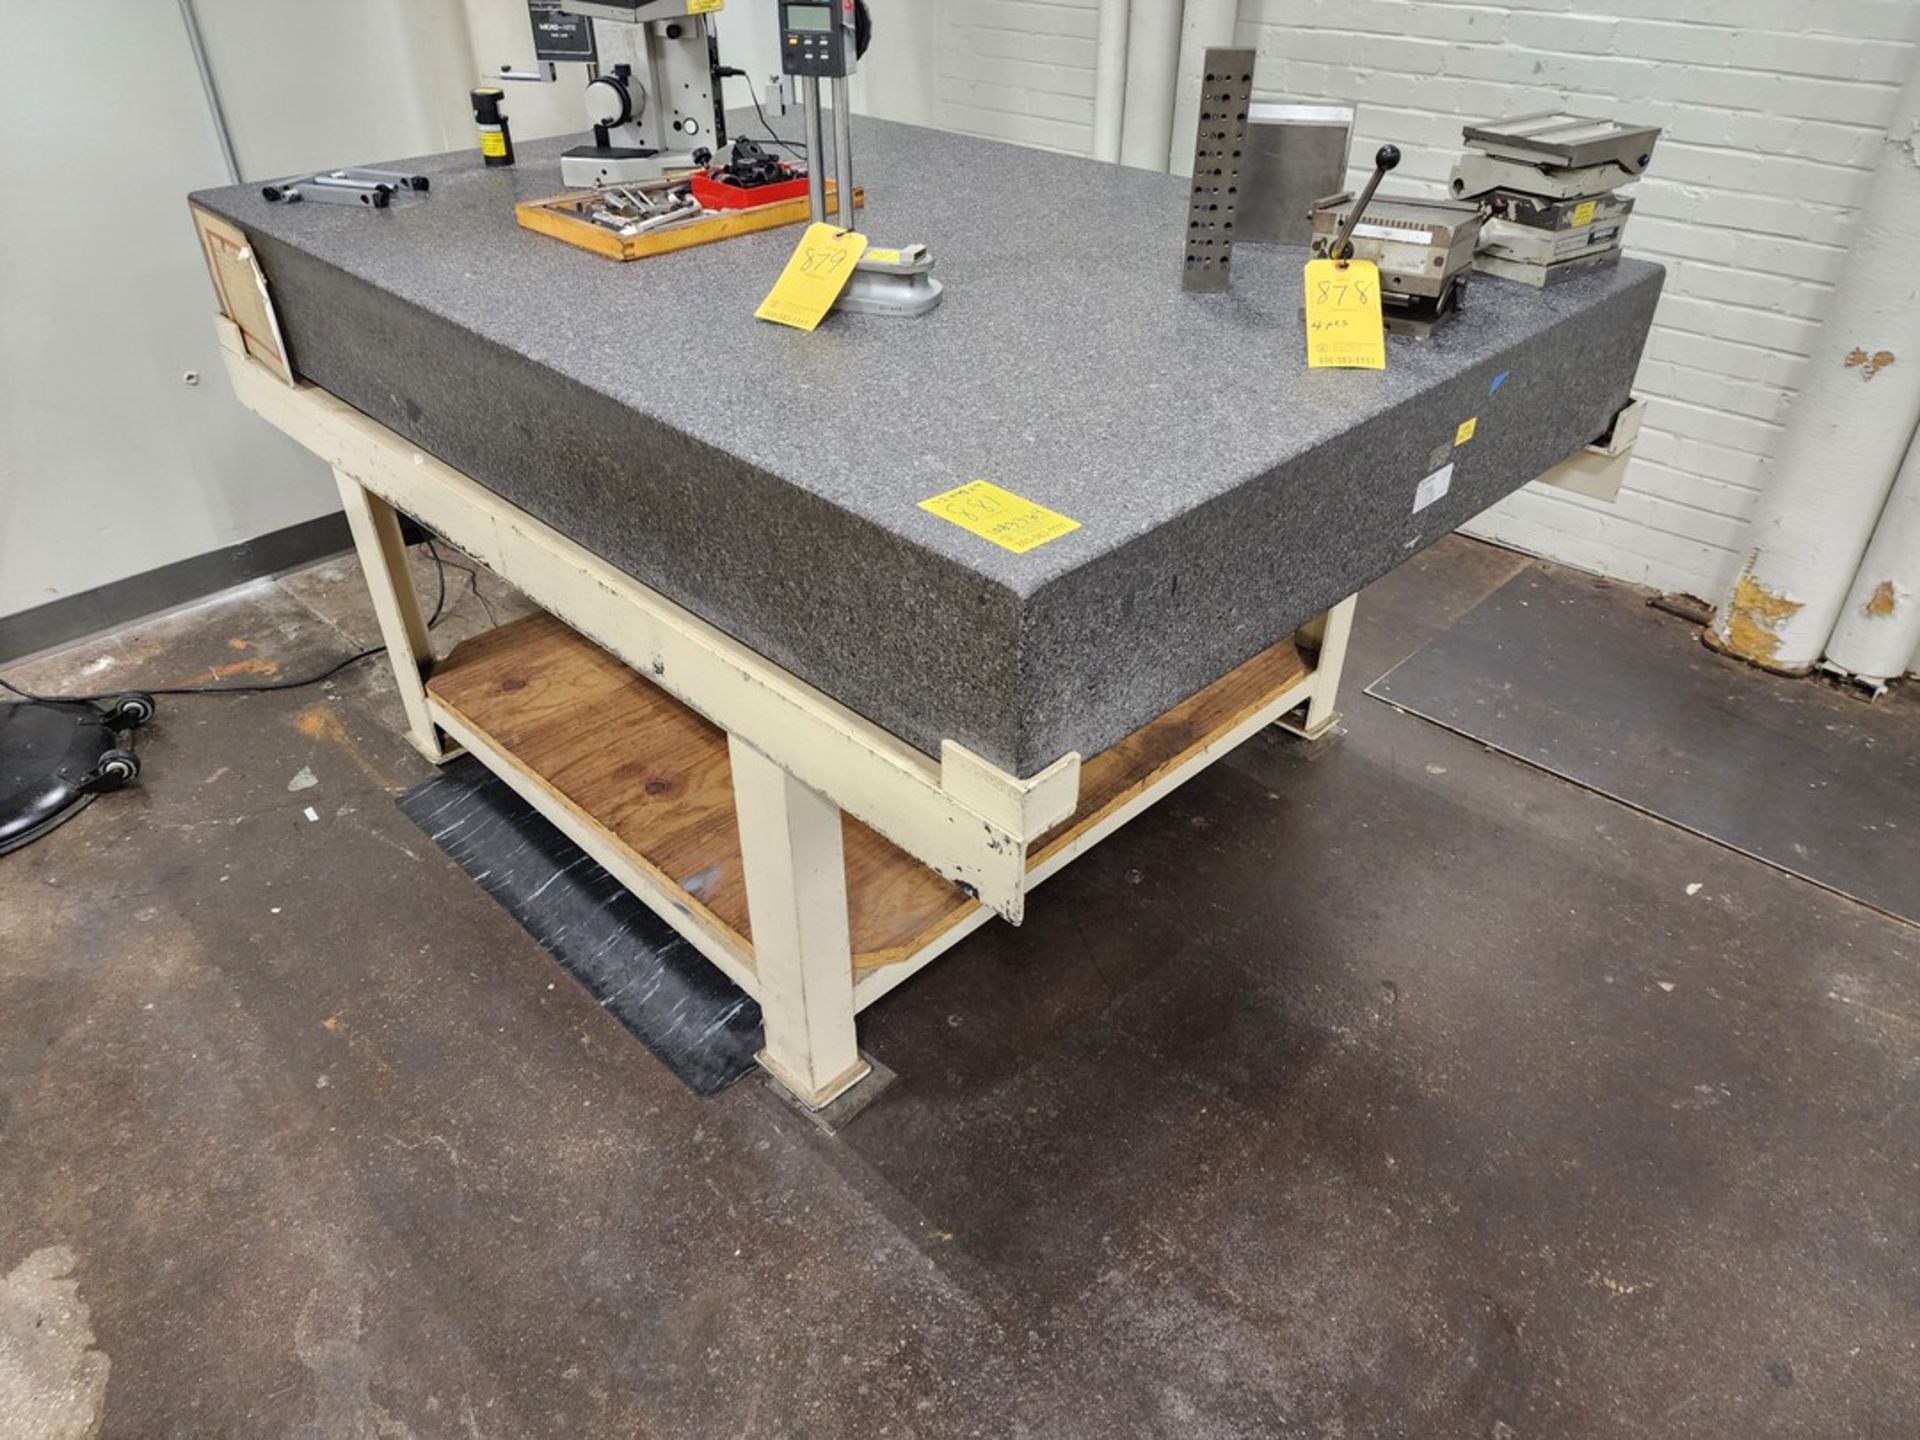 Surface Granite Plate W/ Stand 72" x 48" x 9" (Contents Excl.)